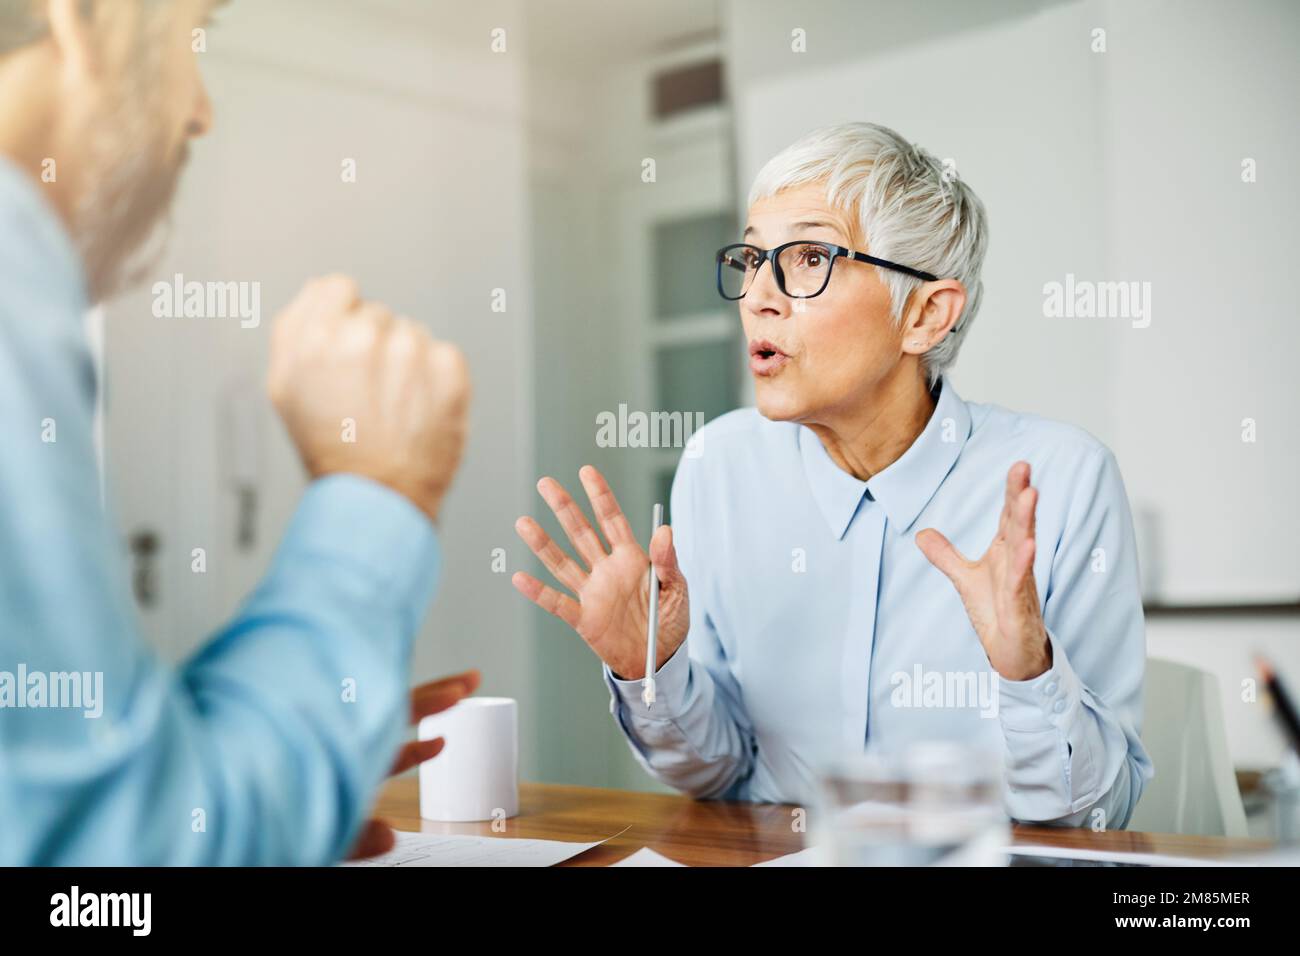 business office person discussion document papers teamwork senior meeting Stock Photo